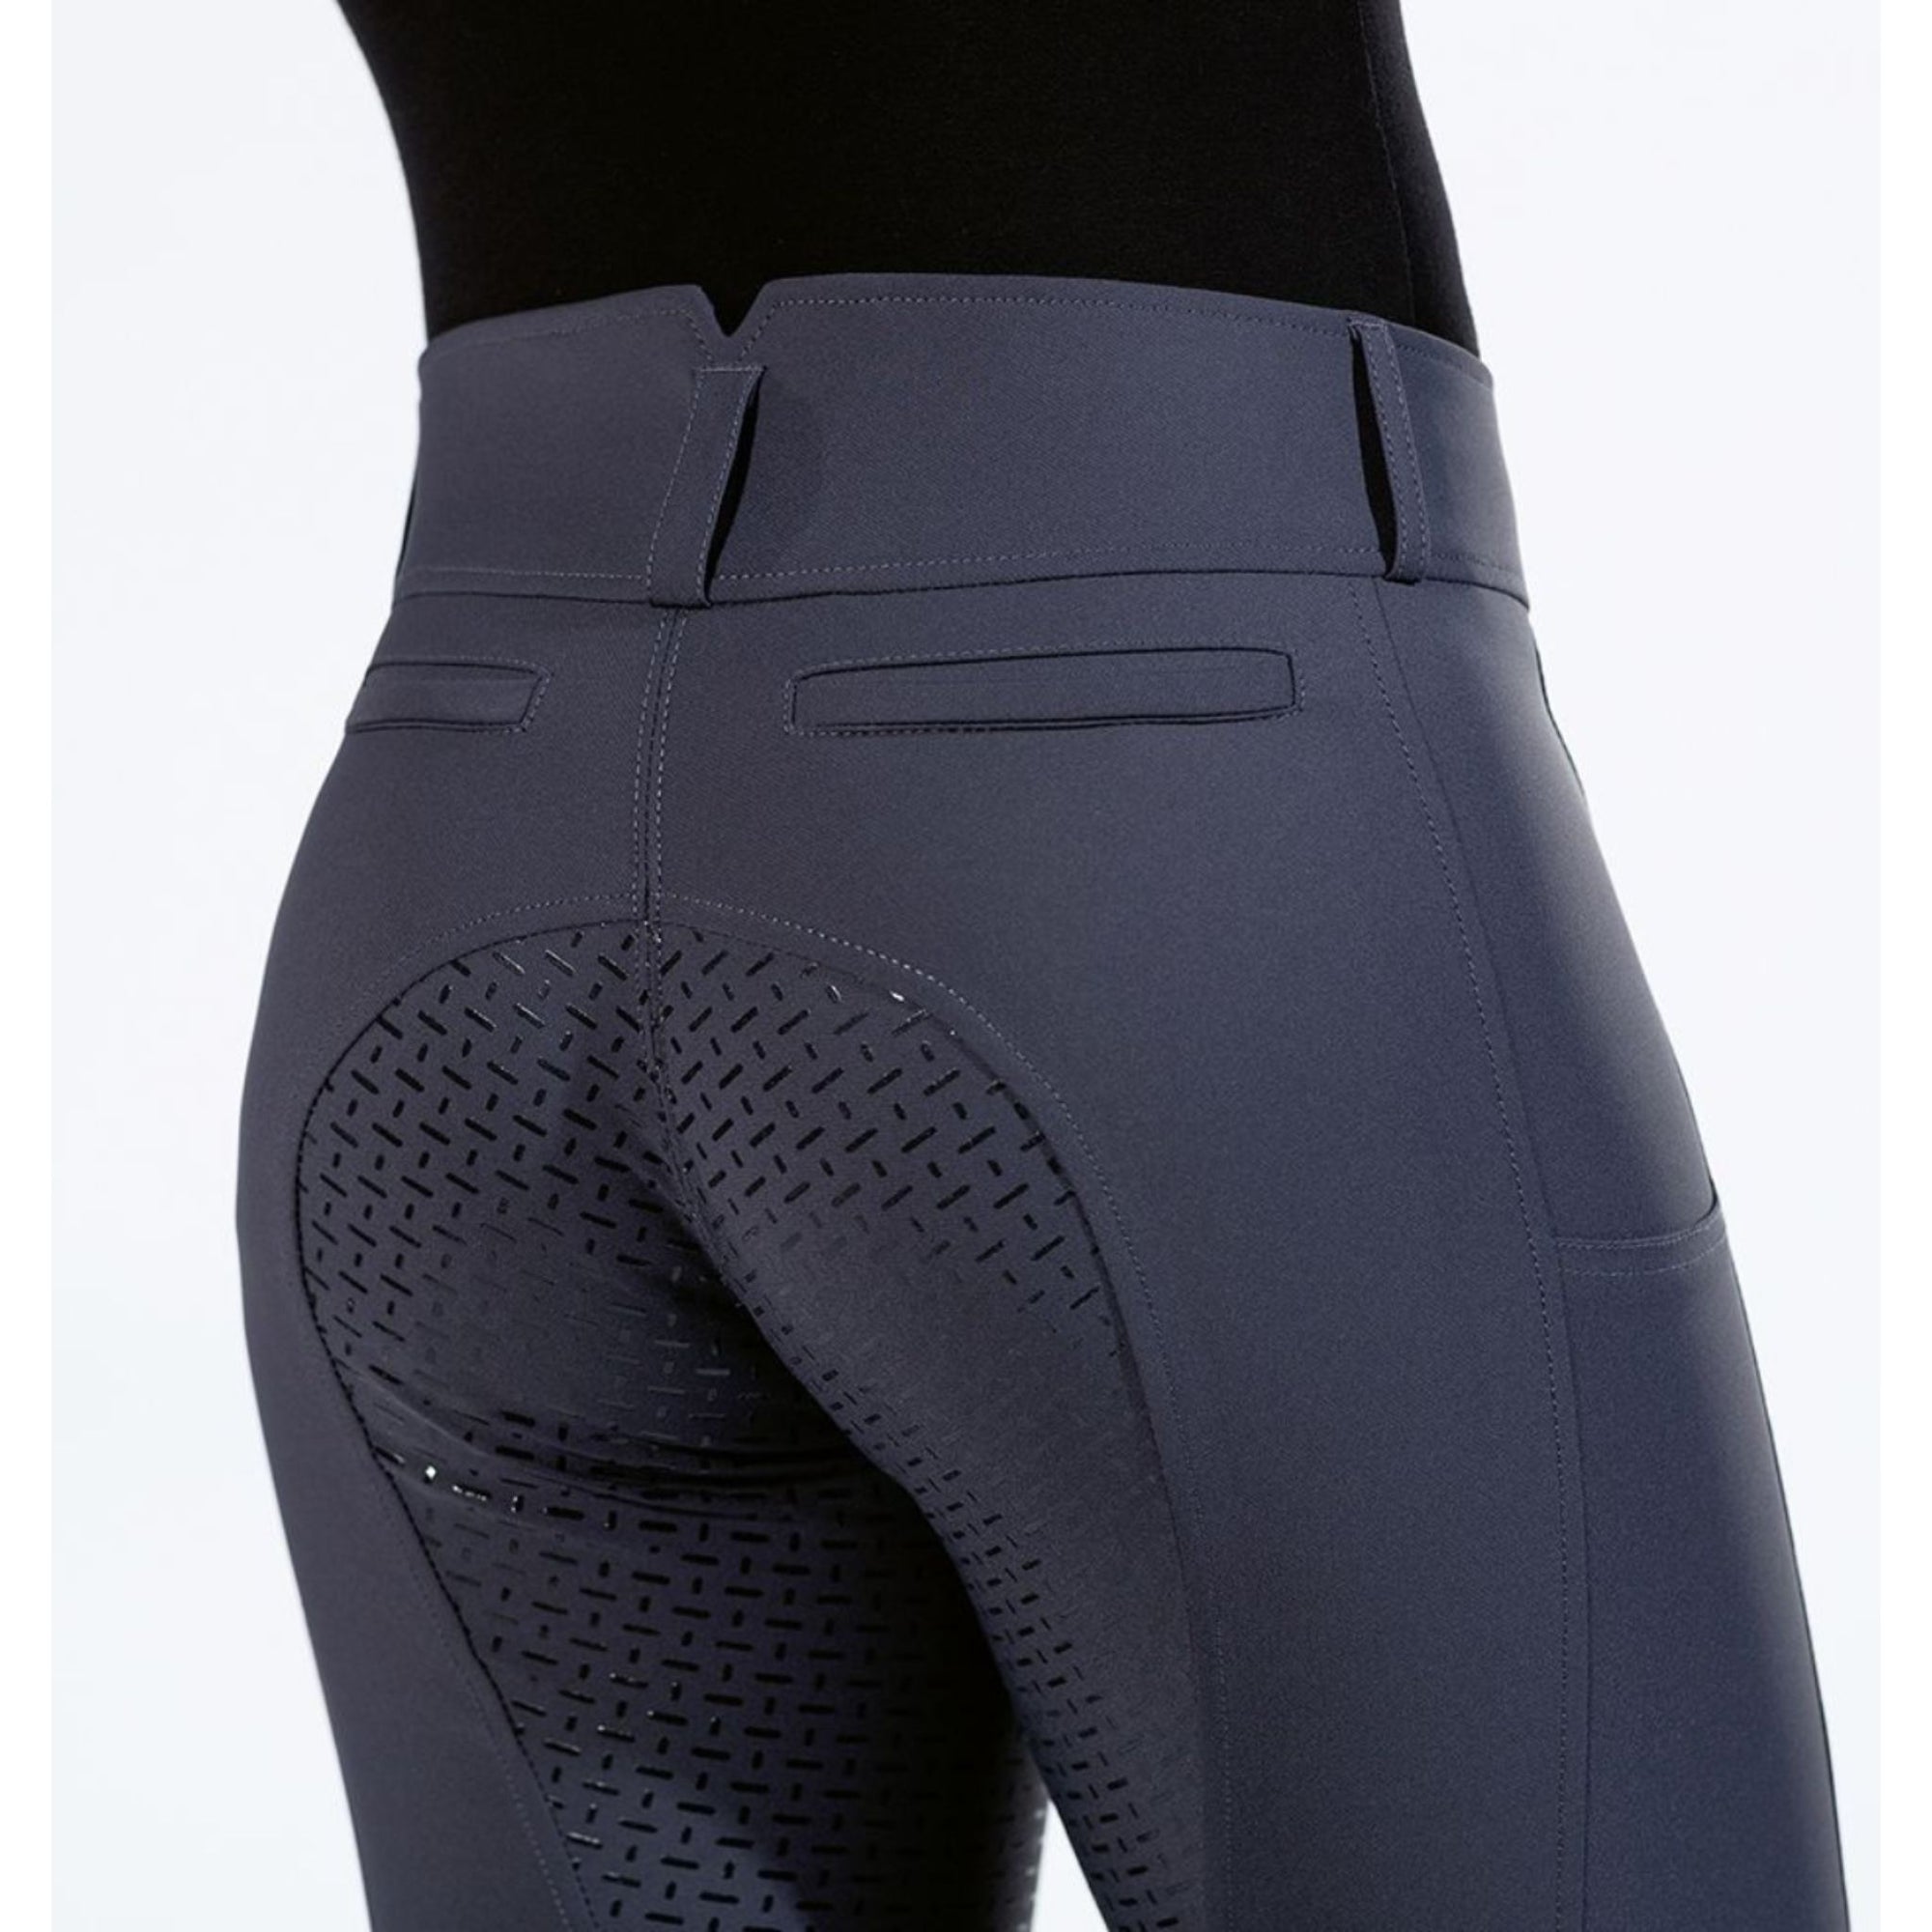 Navy breeches with zip pockets and grippy legs and seat.